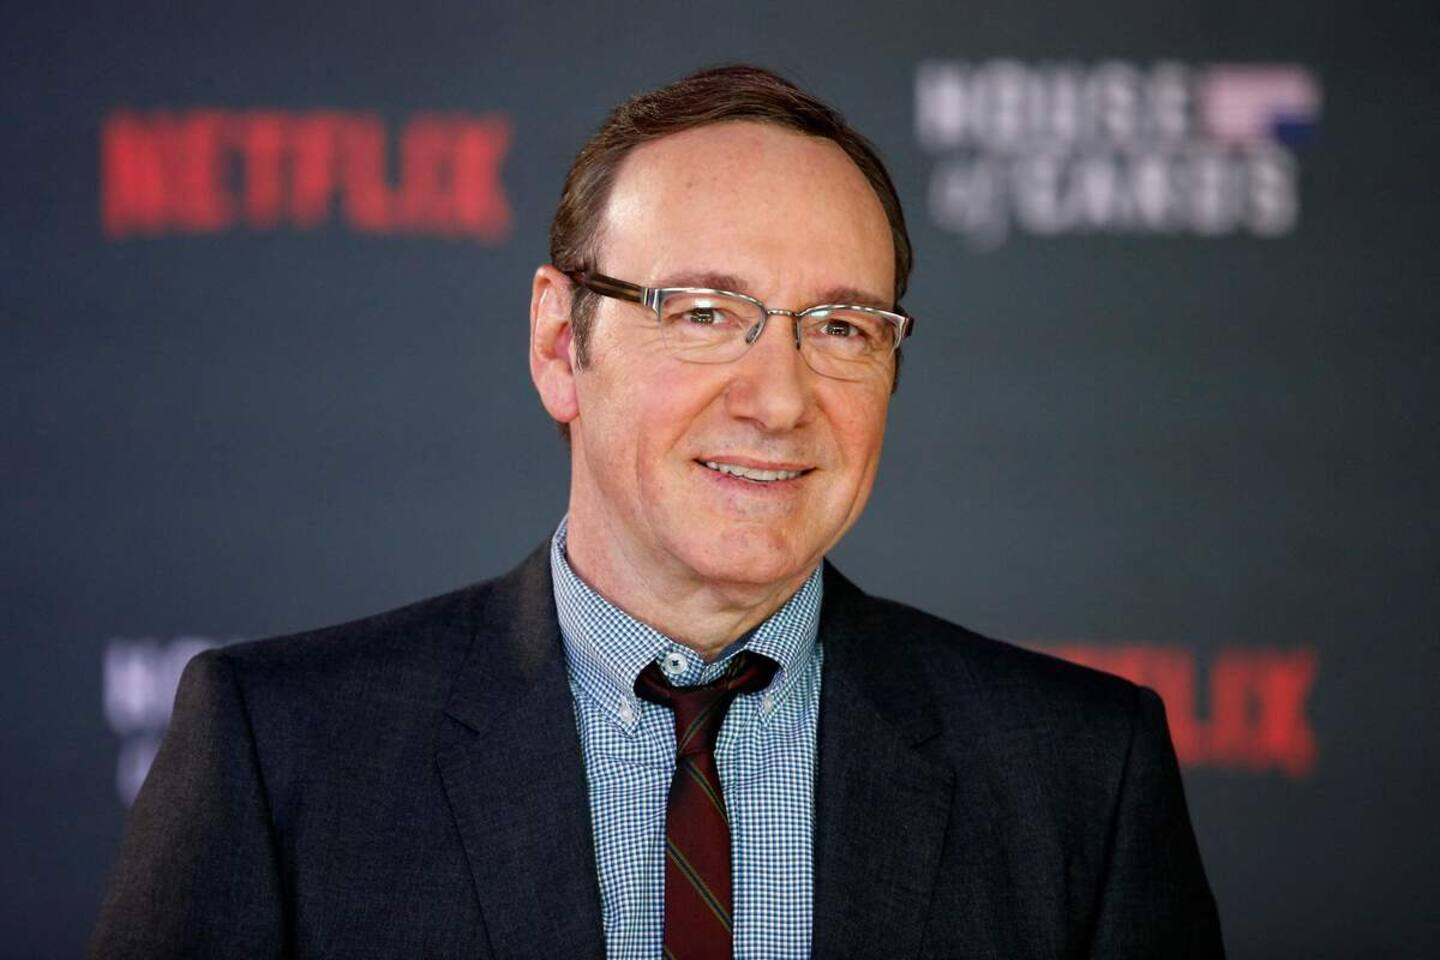 Charged with sexual assault, Kevin Spacey will appear in London on Thursday